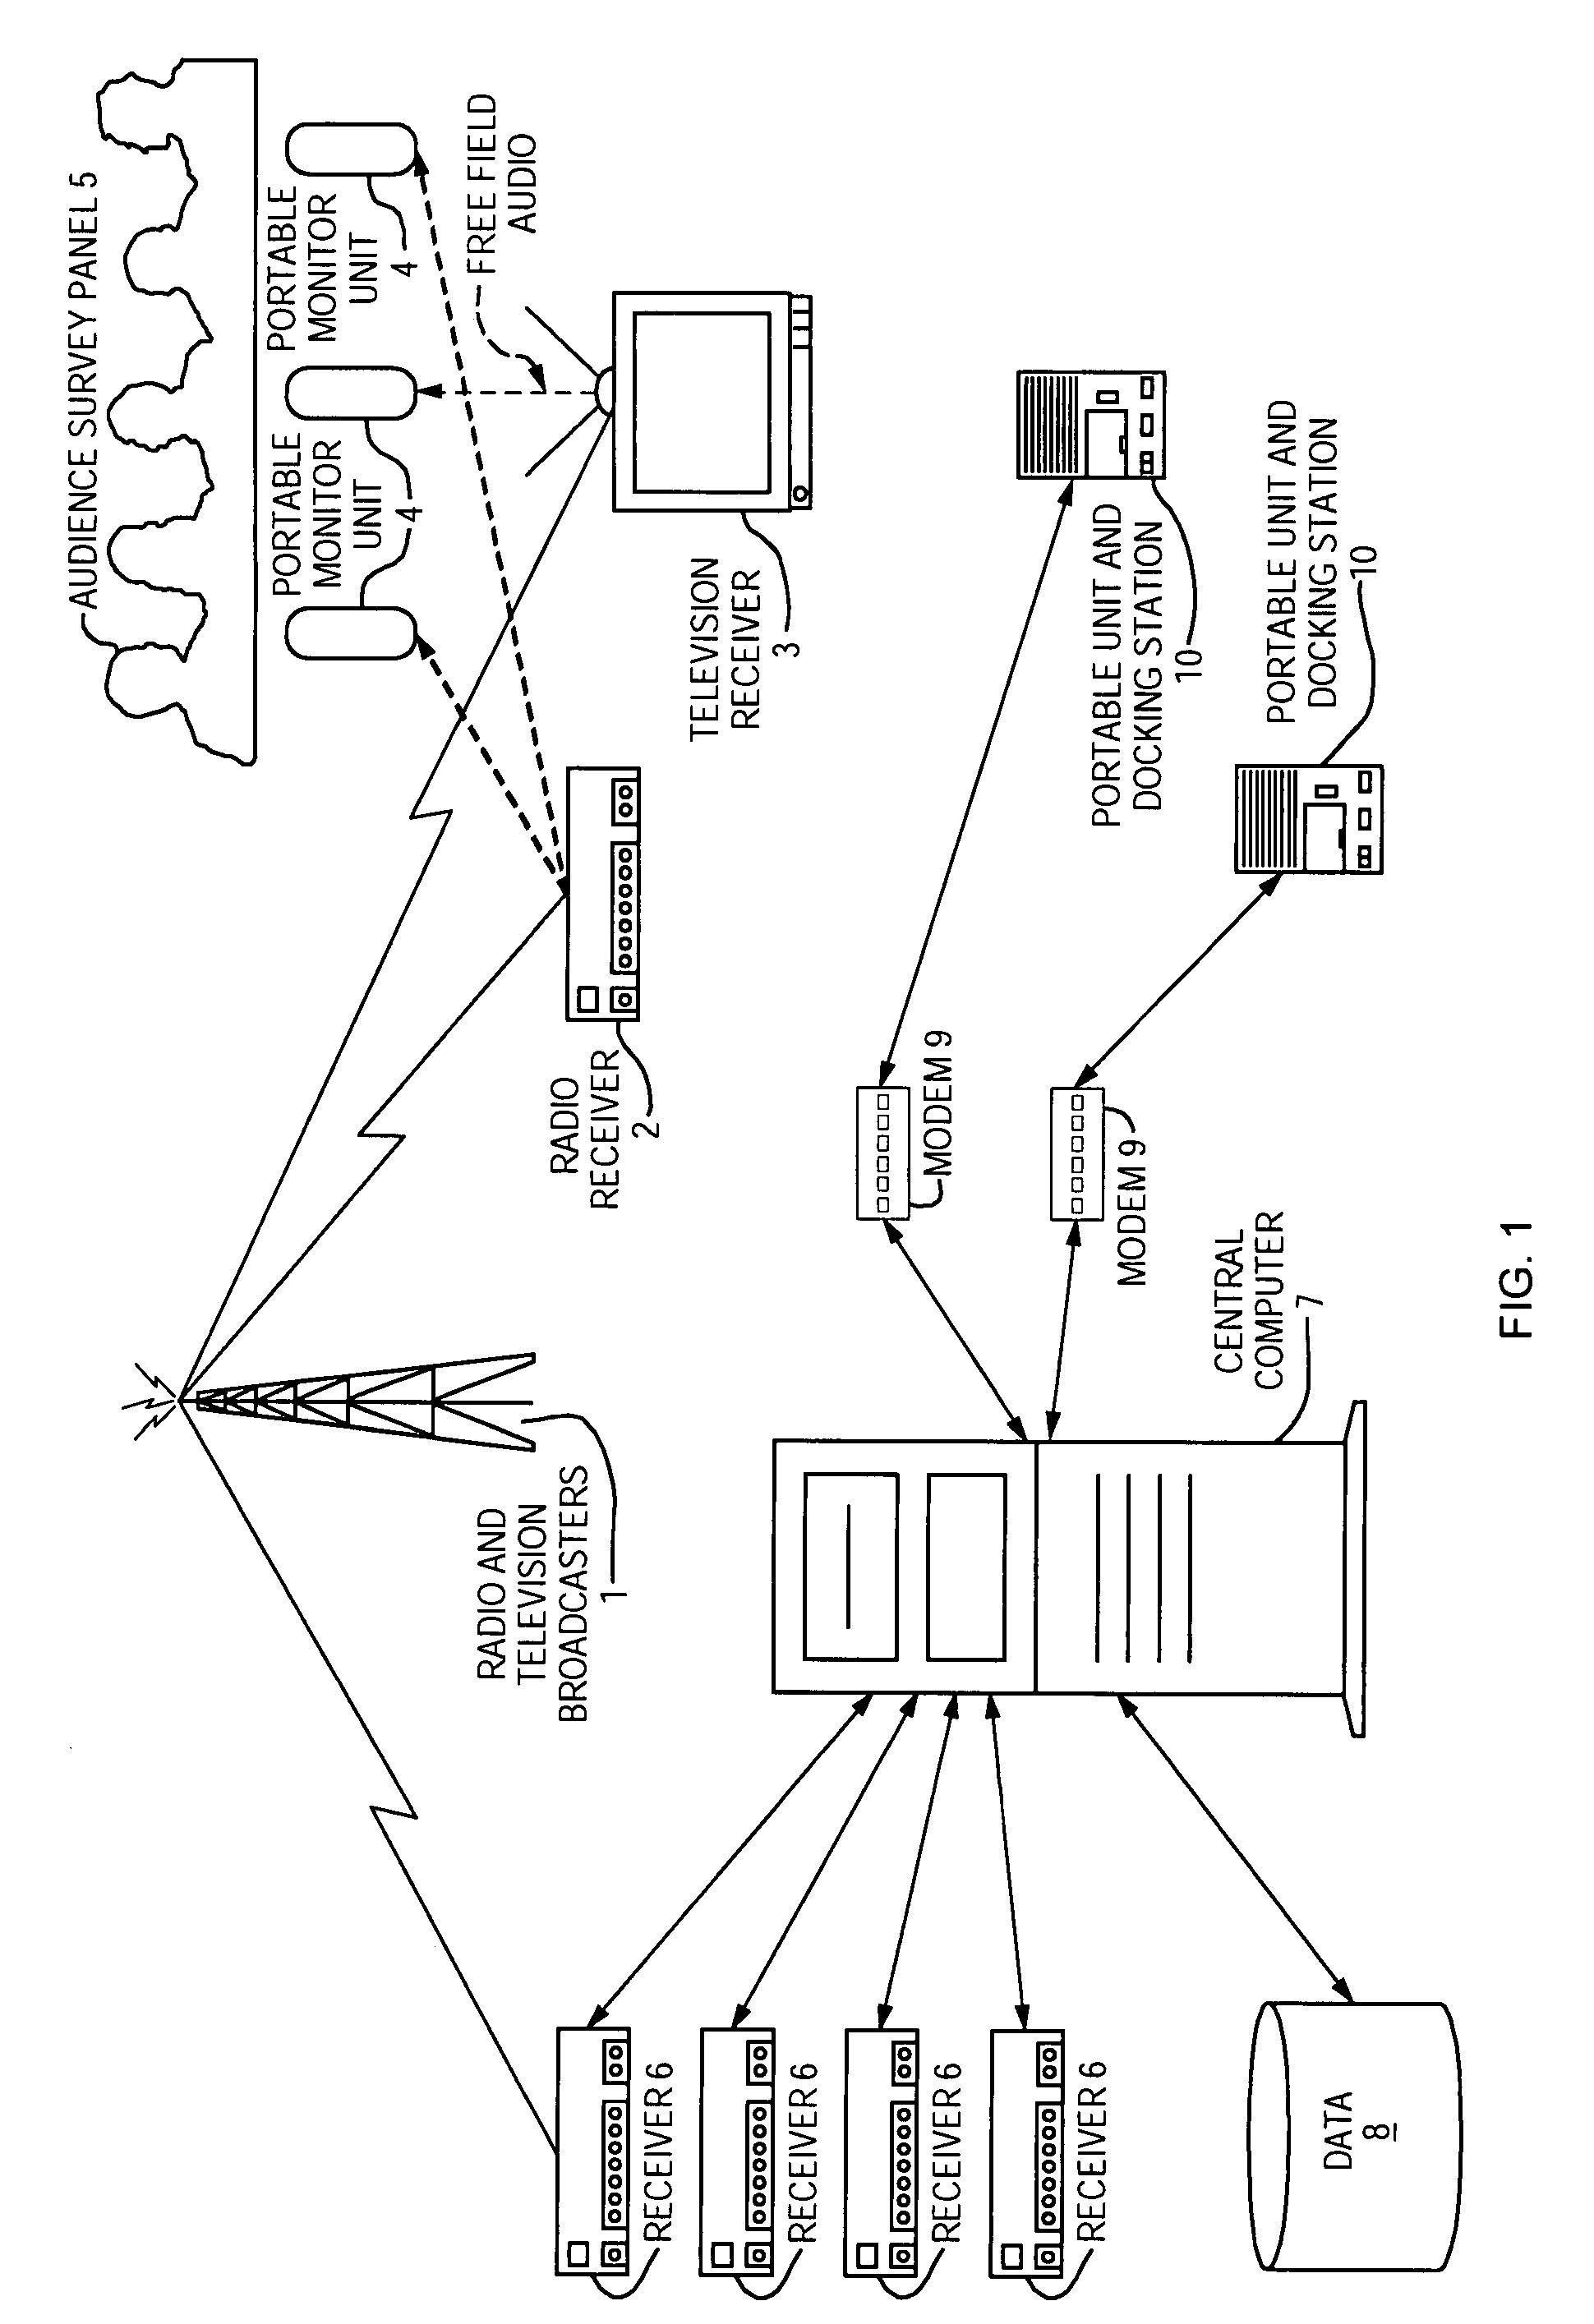 Audience survey system, and system and methods for compressing and correlating audio signals